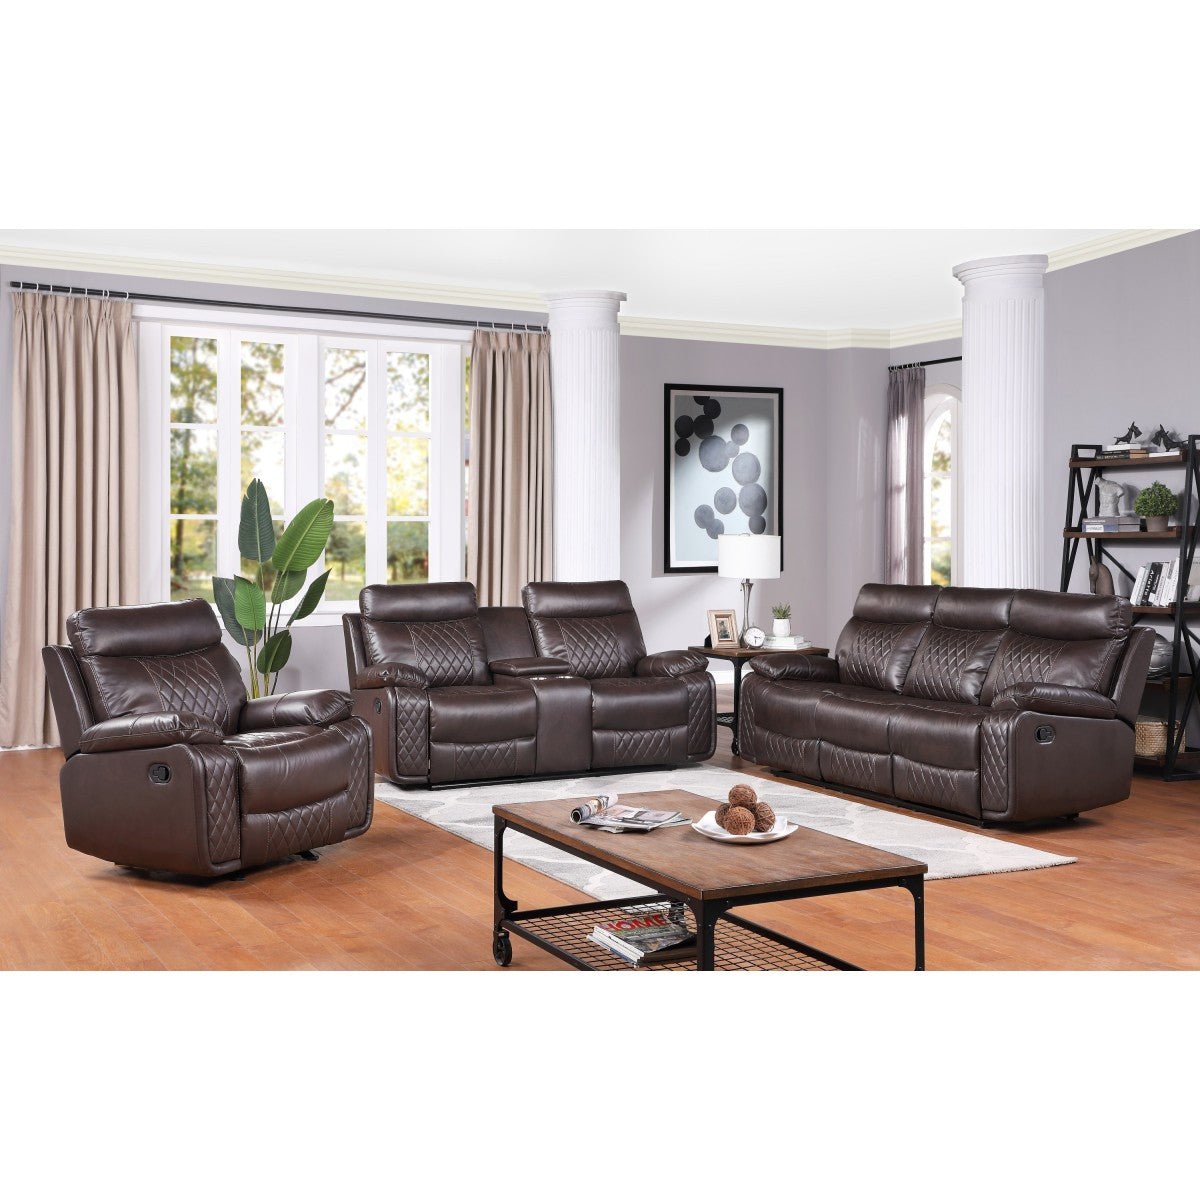 Brown Solid Wood And Plywood Faux Leather Upholstery Double Room Seat Set (Sofa, Love And Chair)